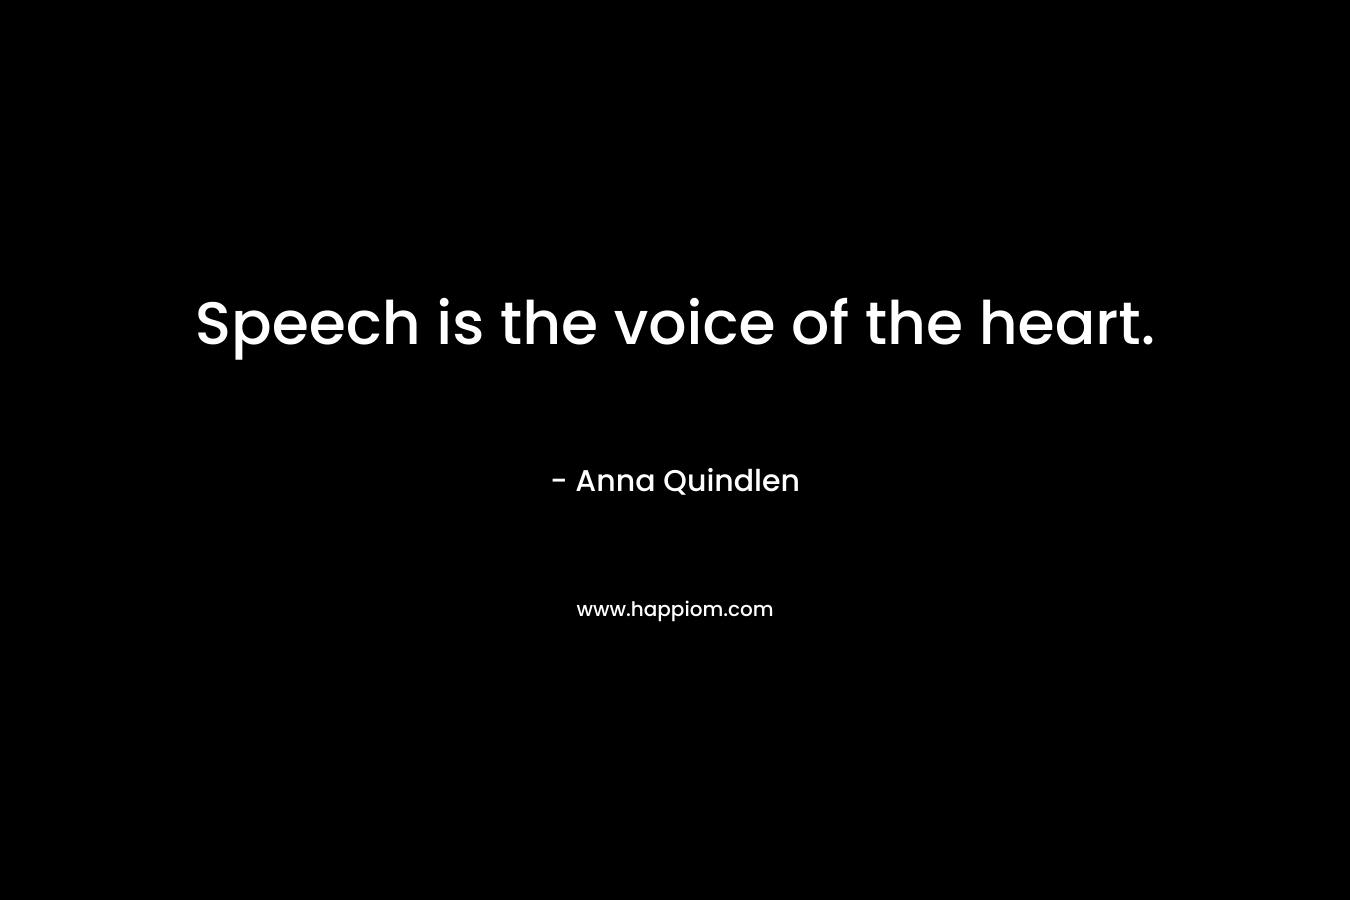 Speech is the voice of the heart.